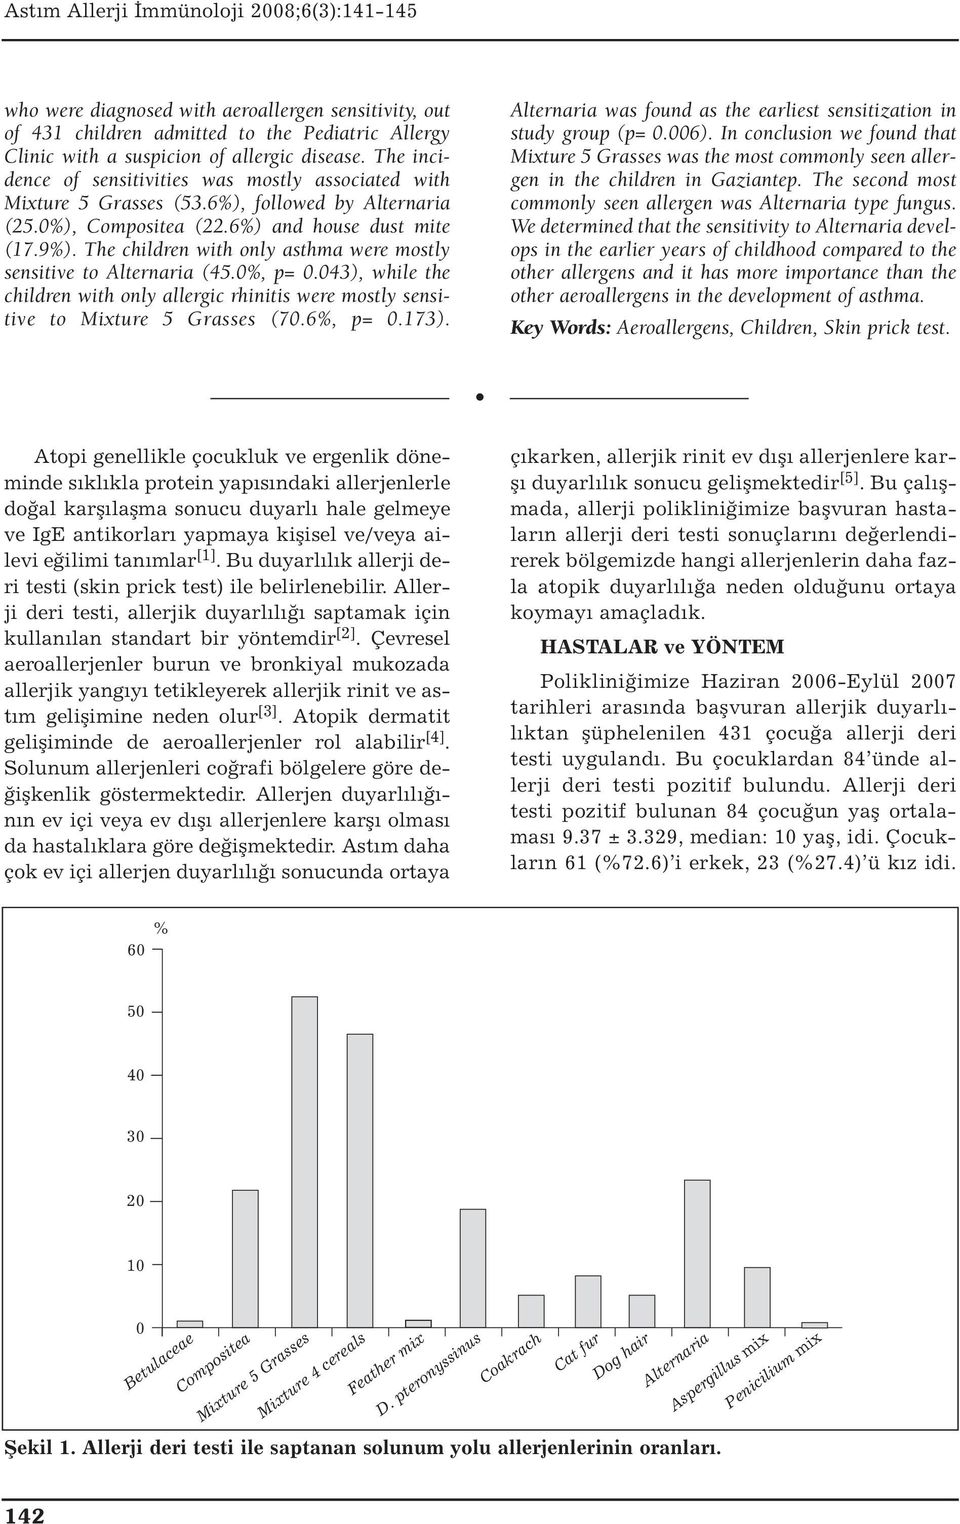 The children with only asthma were mostly sensitive to Alternaria (45.0%, p= 0.043), while the children with only allergic rhinitis were mostly sensitive to Mixture 5 Grasses (70.6%, p= 0.173).